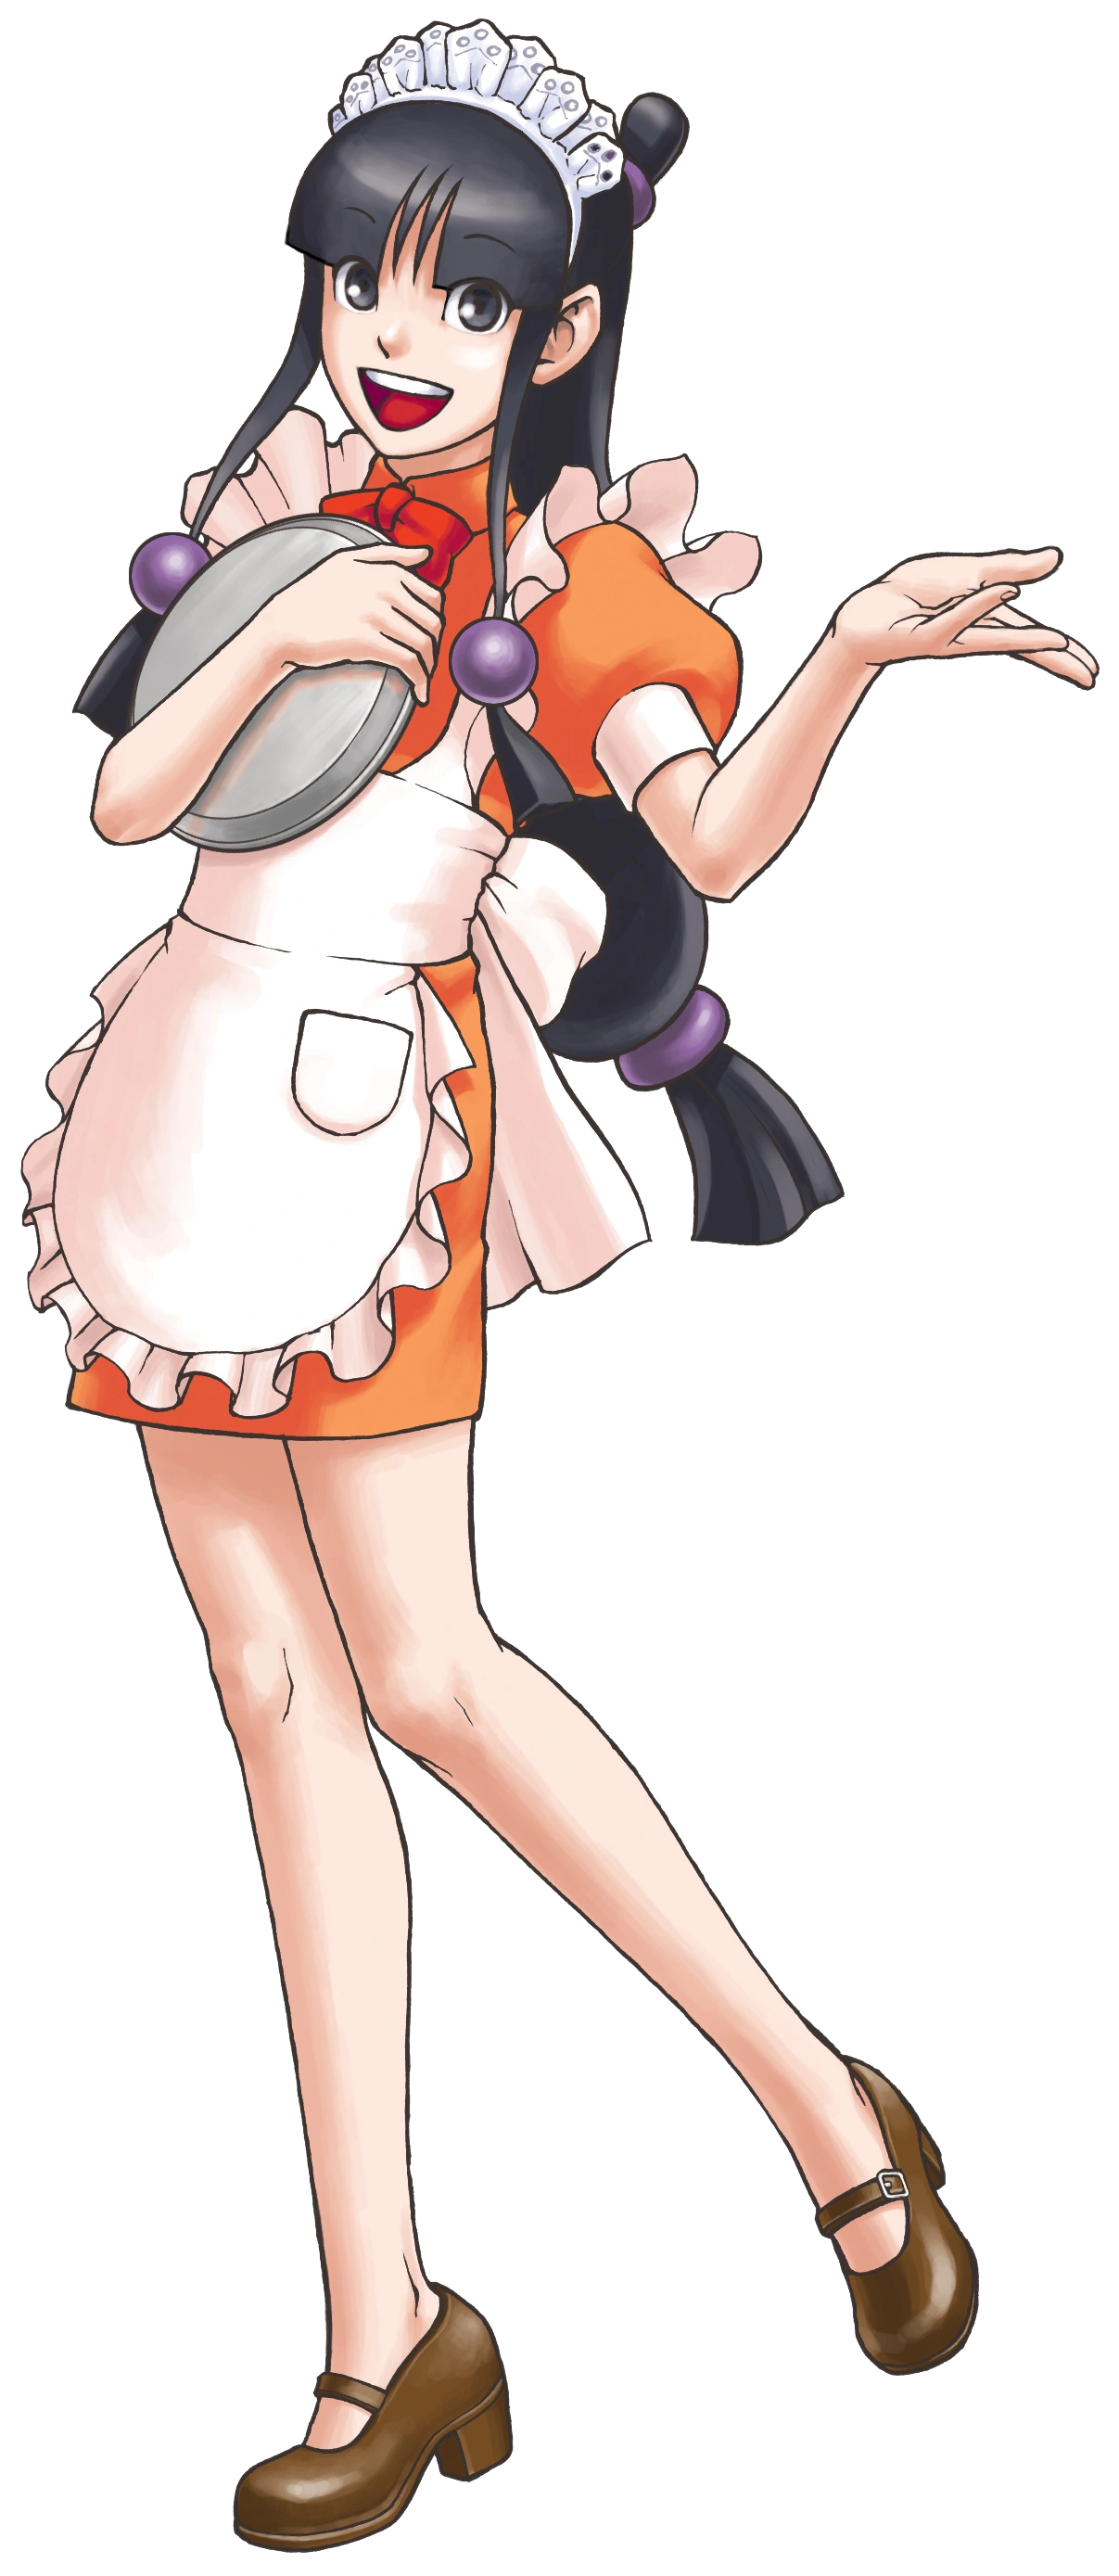 Maya wearing a waitress outfit comprised of a short orange skirt dress with a frilly white apron on top, along with brown high heels and a frilly white headband. She is holding a silver plate with her right arm over her chest, her left arm gesturing toward the viewer. Her hair remains the same.